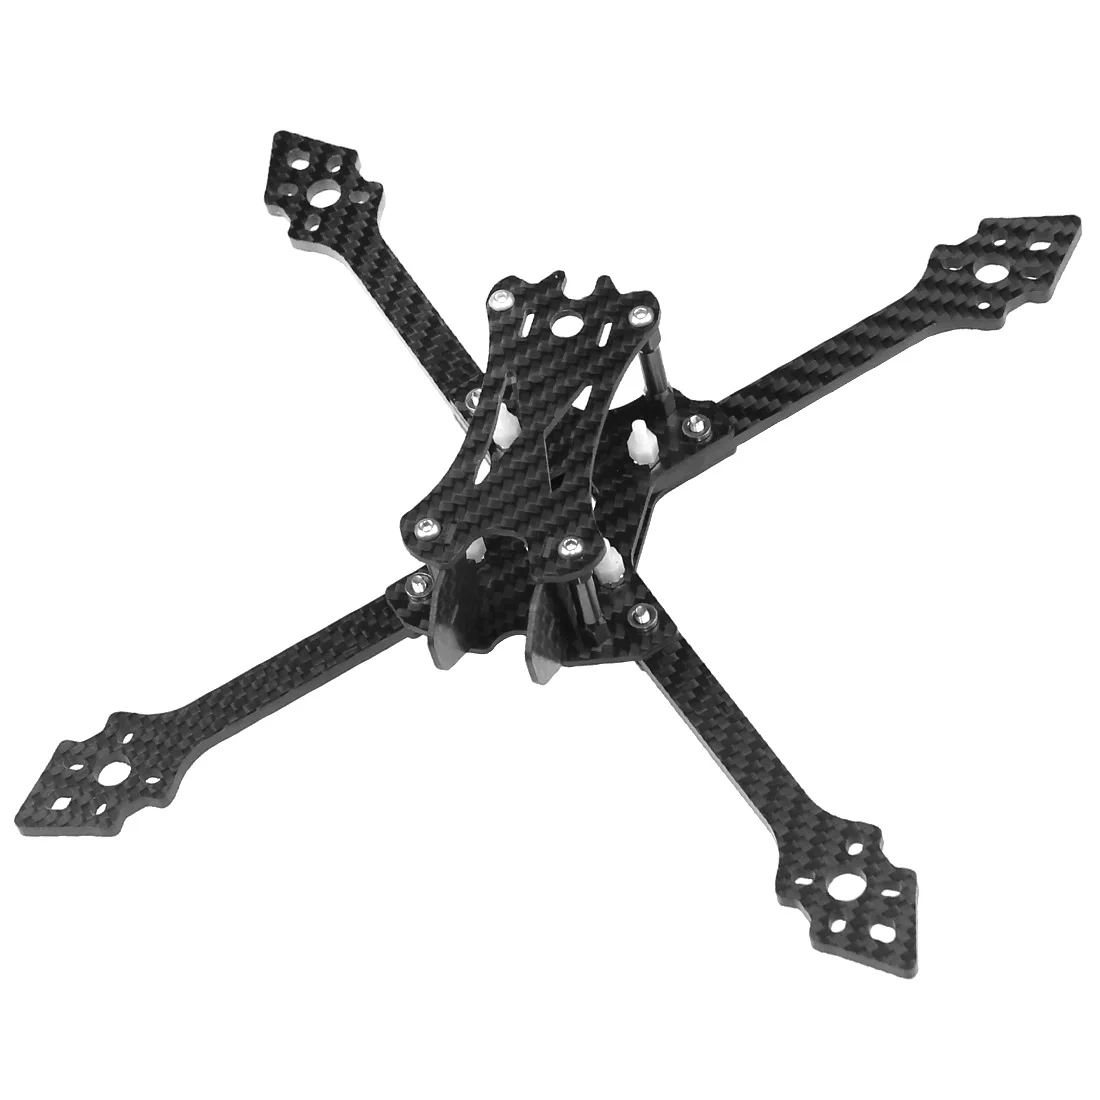 

Feichao X220 220mm Wheelbase Carbon Fiber Quadcopter Frame Kit 4mm Arms 5inch Propeller for FPV Racing Freestyle Drone